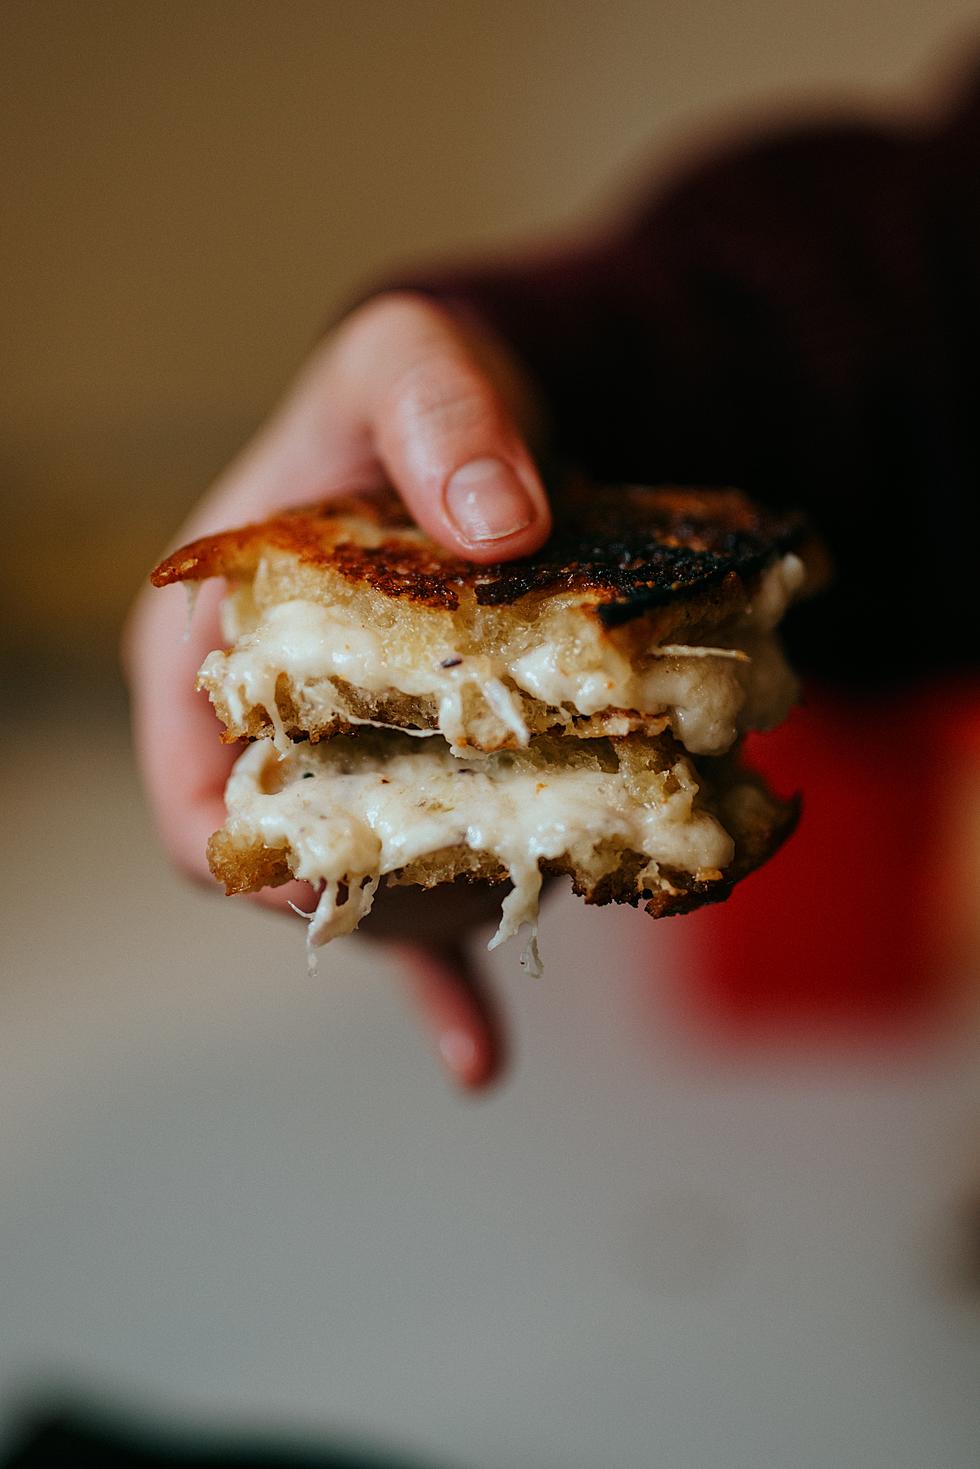 The SouthCoast’s Top 8 Spots to Grab a Grilled Cheese